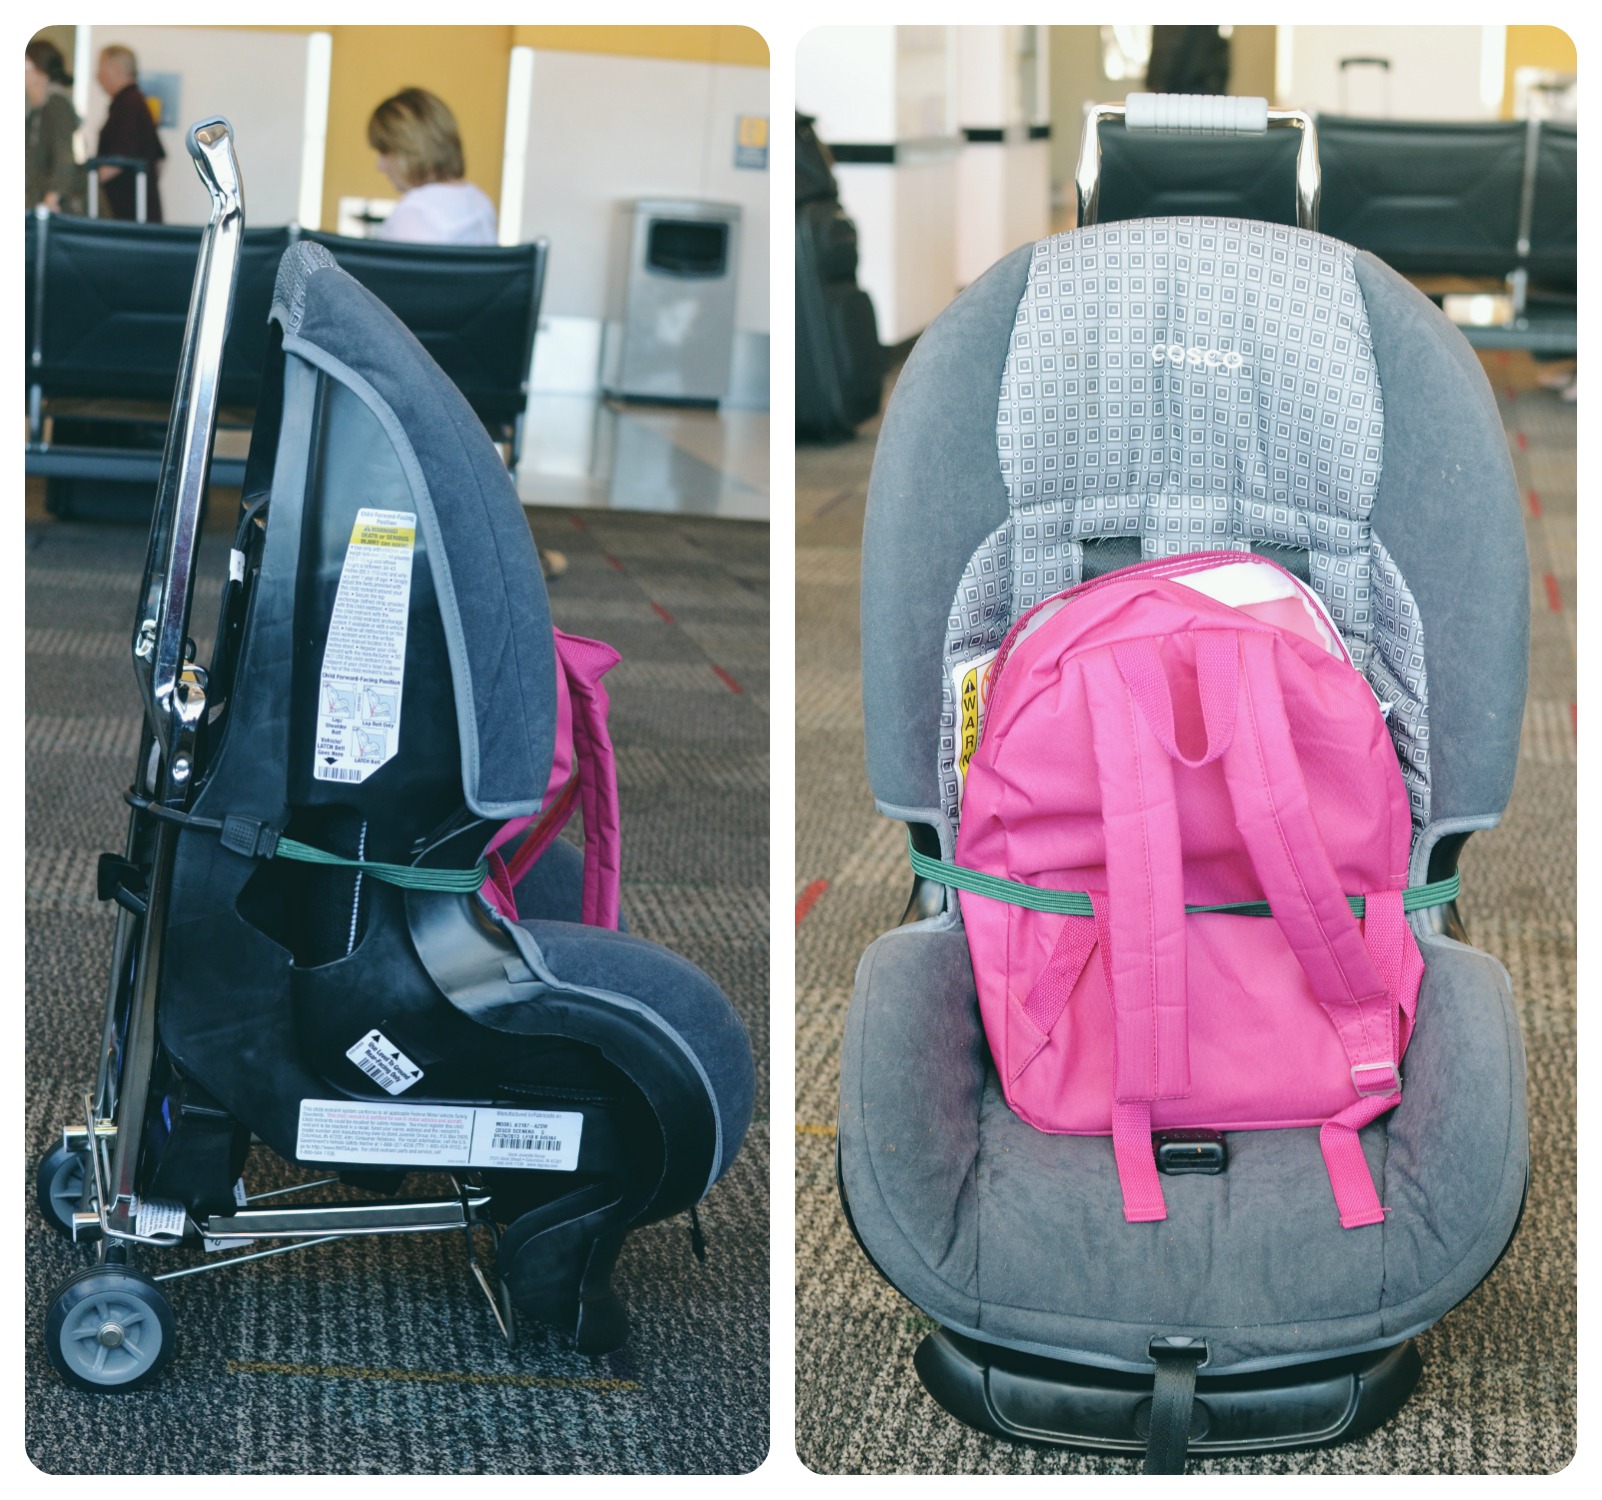 checking car seat and stroller at airport